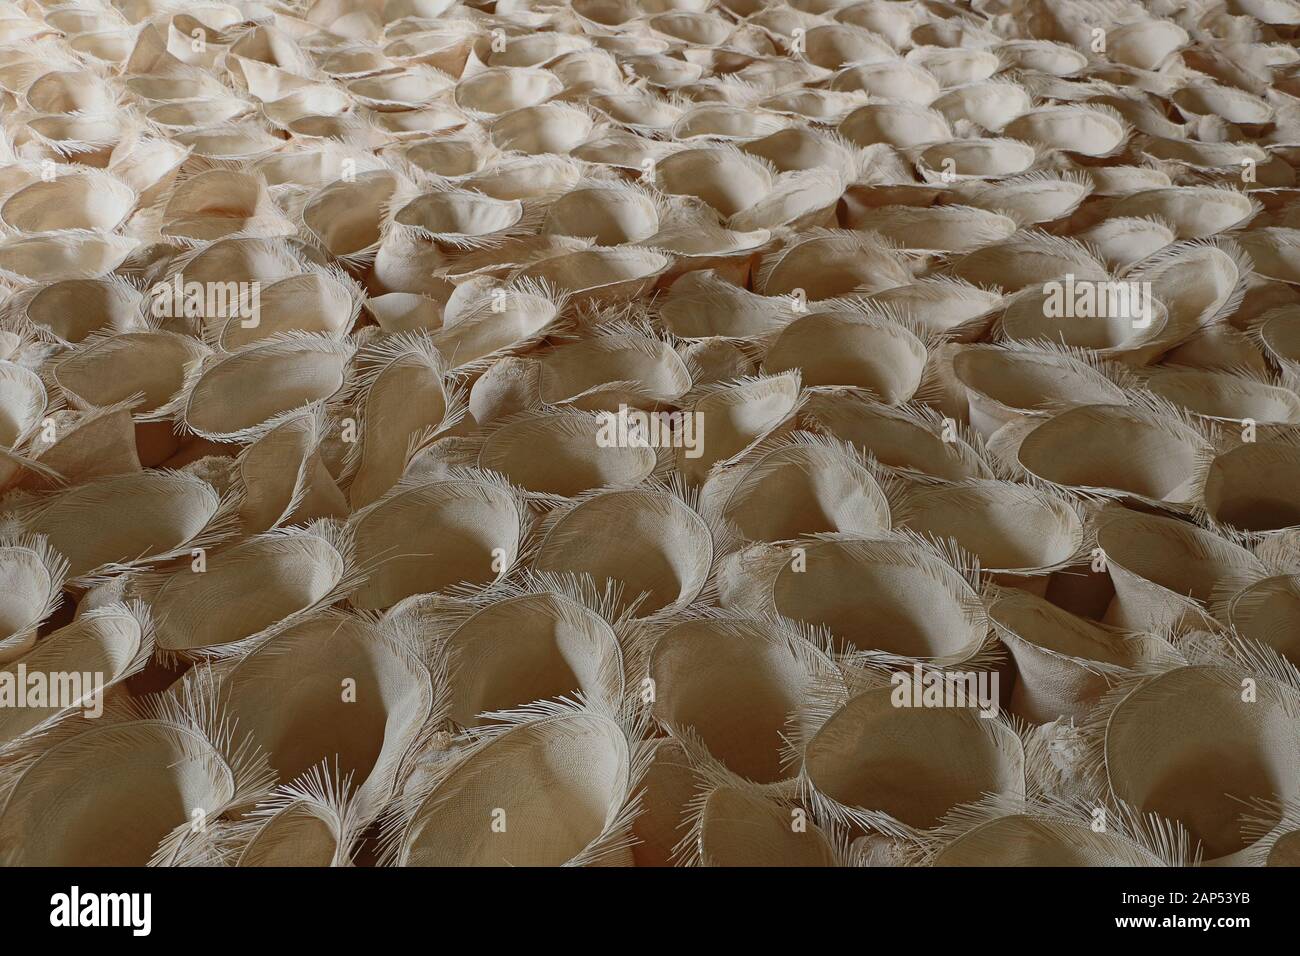 Blanks of Panama Hats in Ecuador Half-finished hat Stock Photo